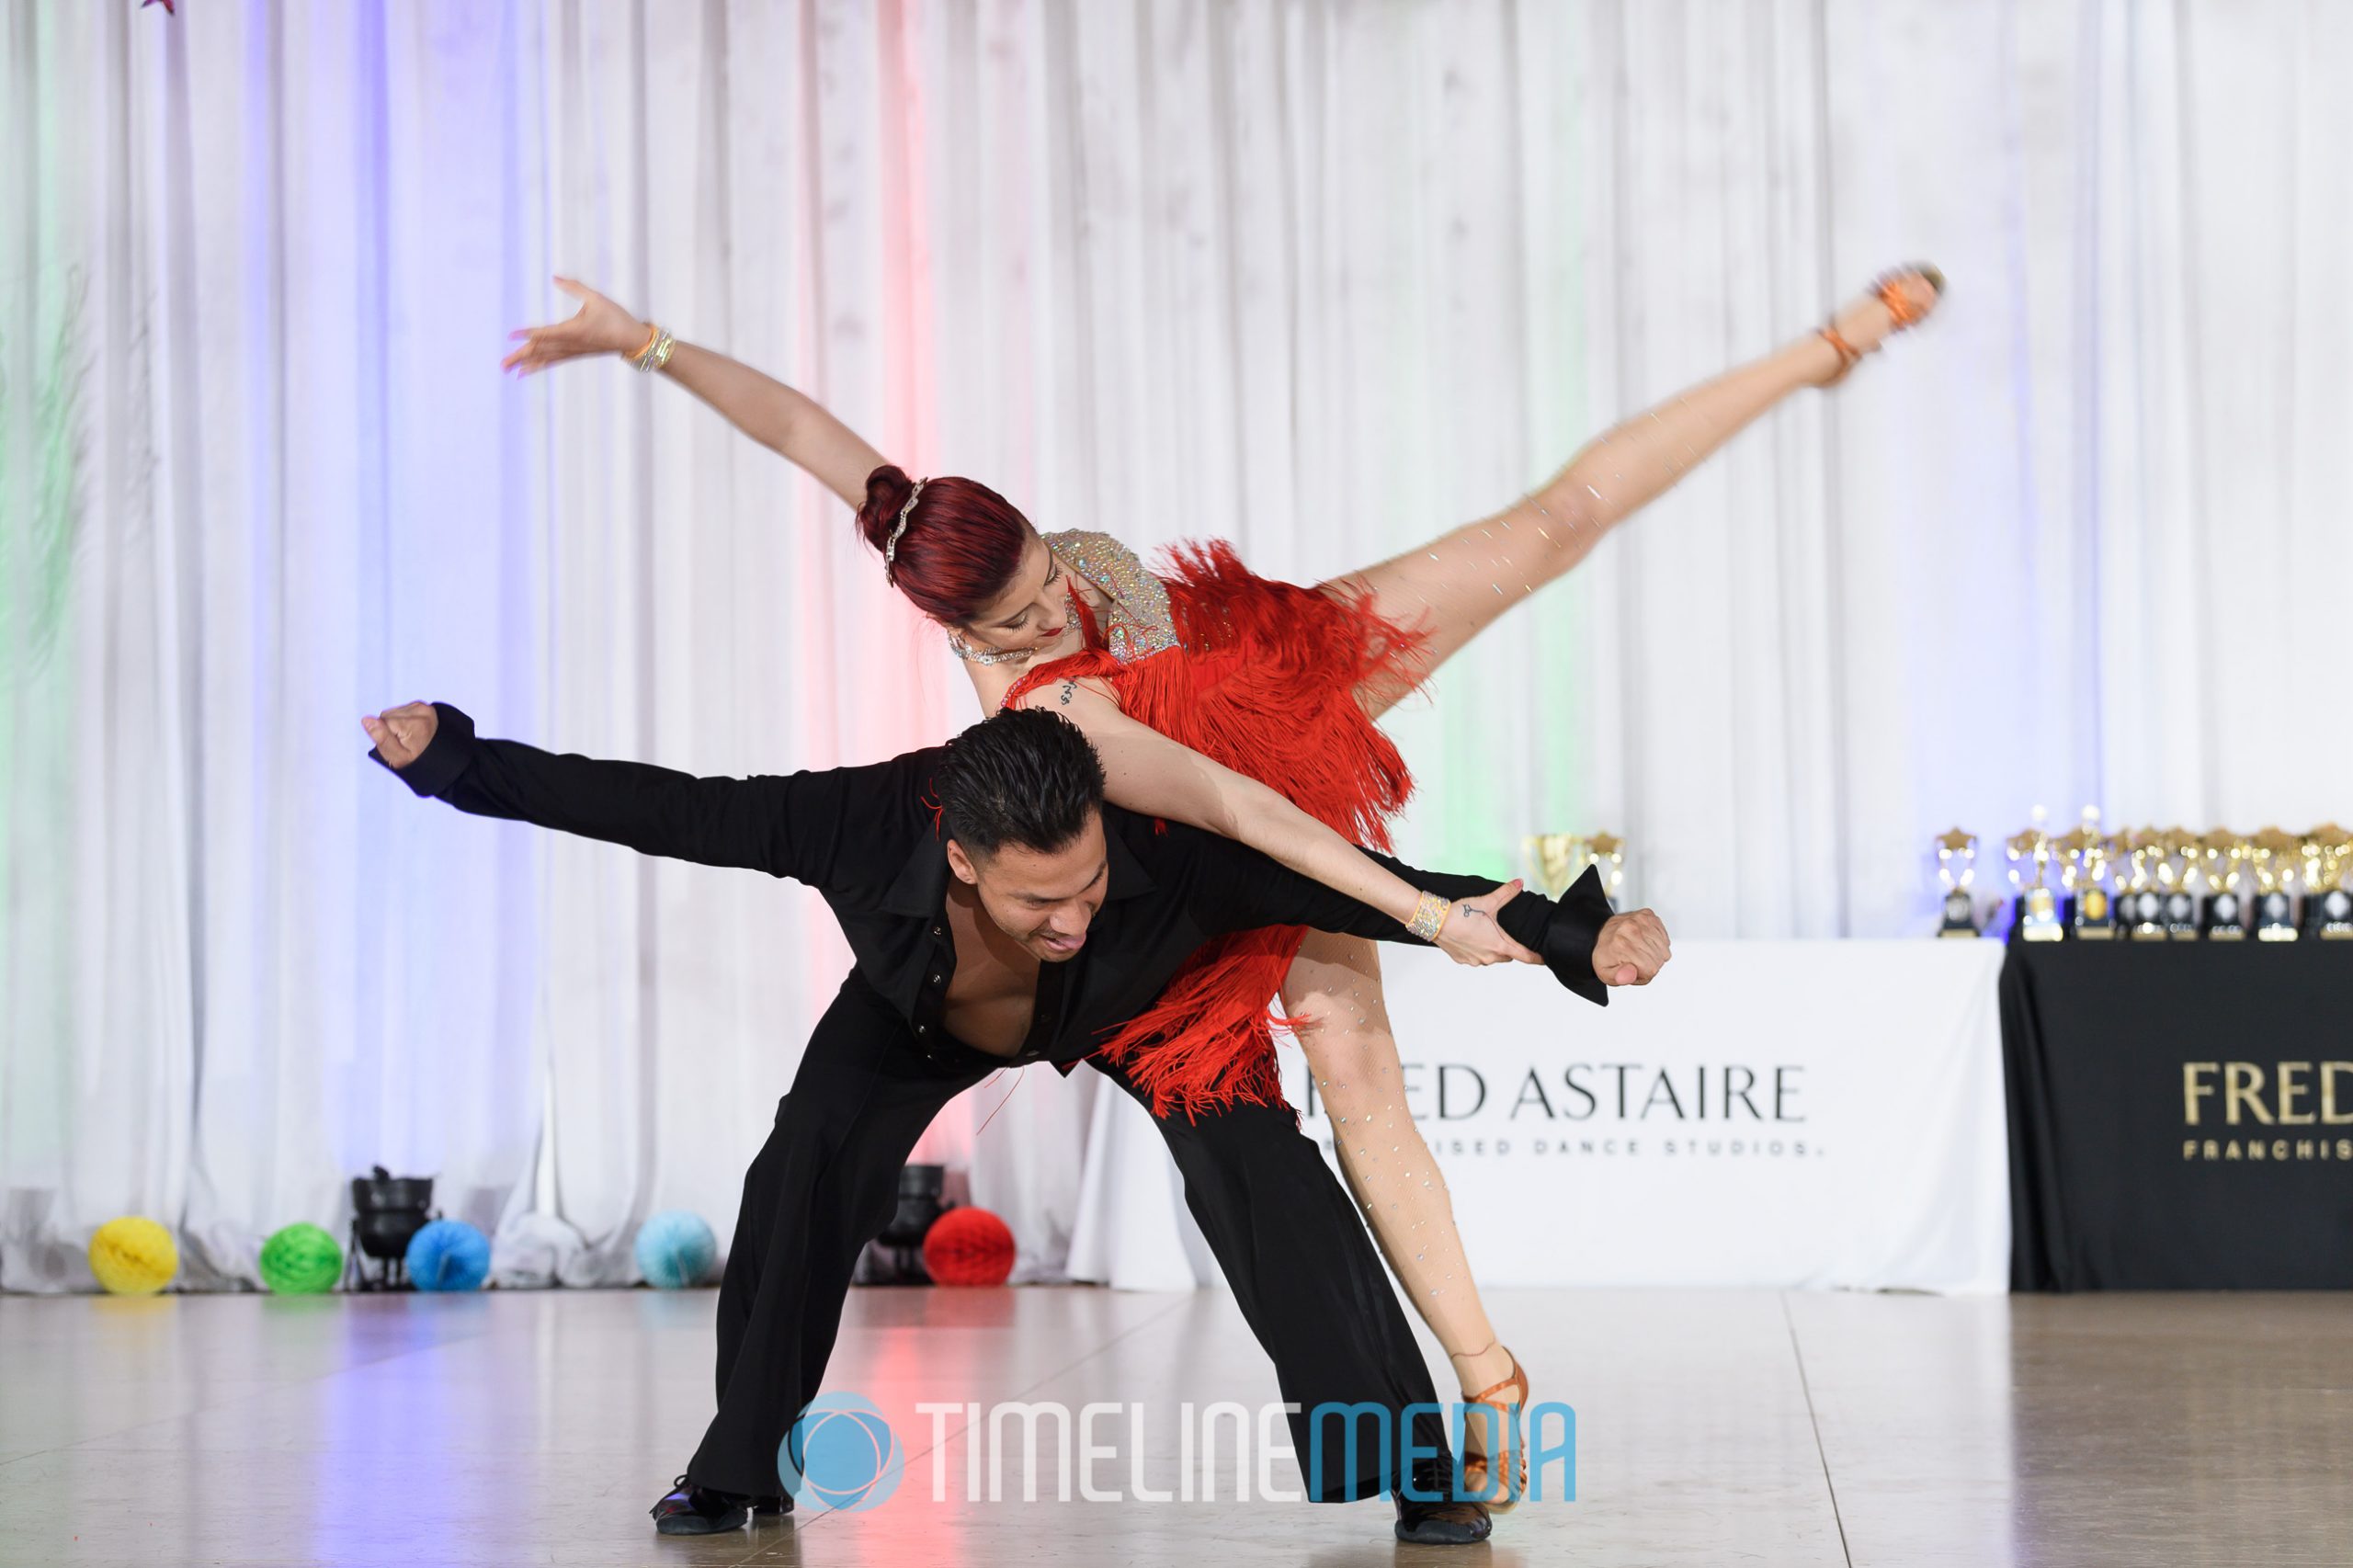 Fred Astaire Reston Professional Show ©TimeLine Media